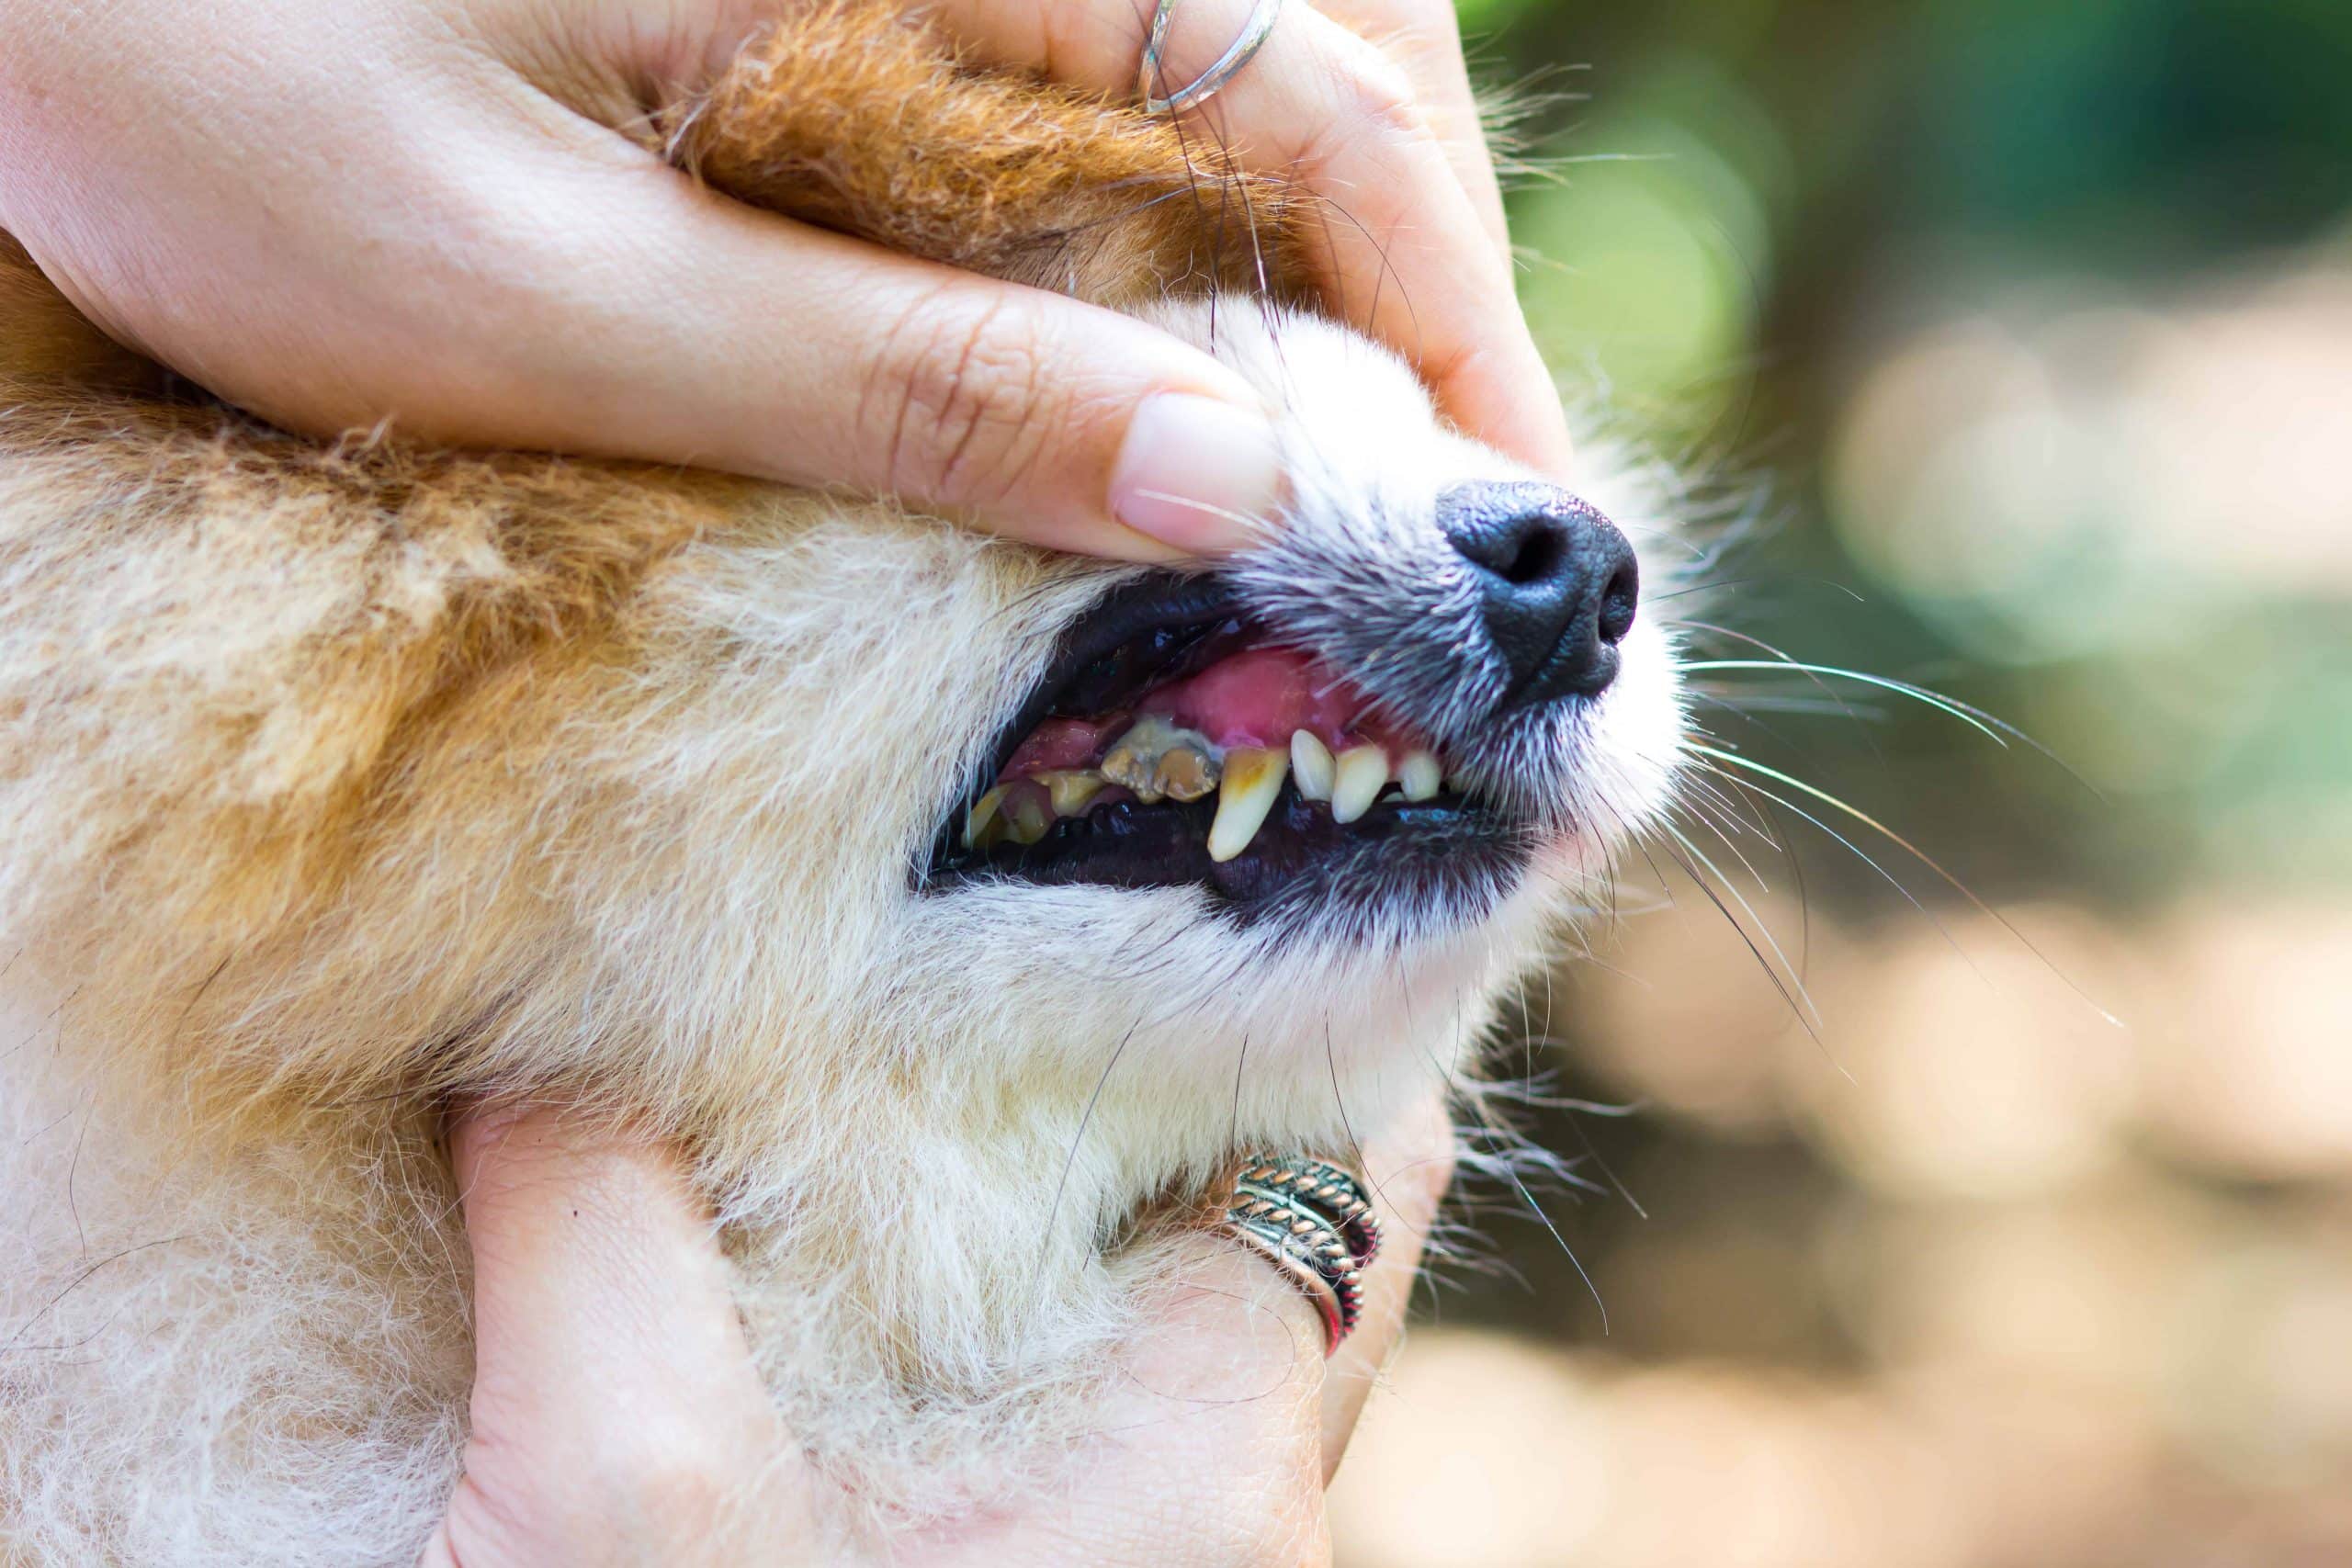 Dog periodontal insurance and checking dog teeth.